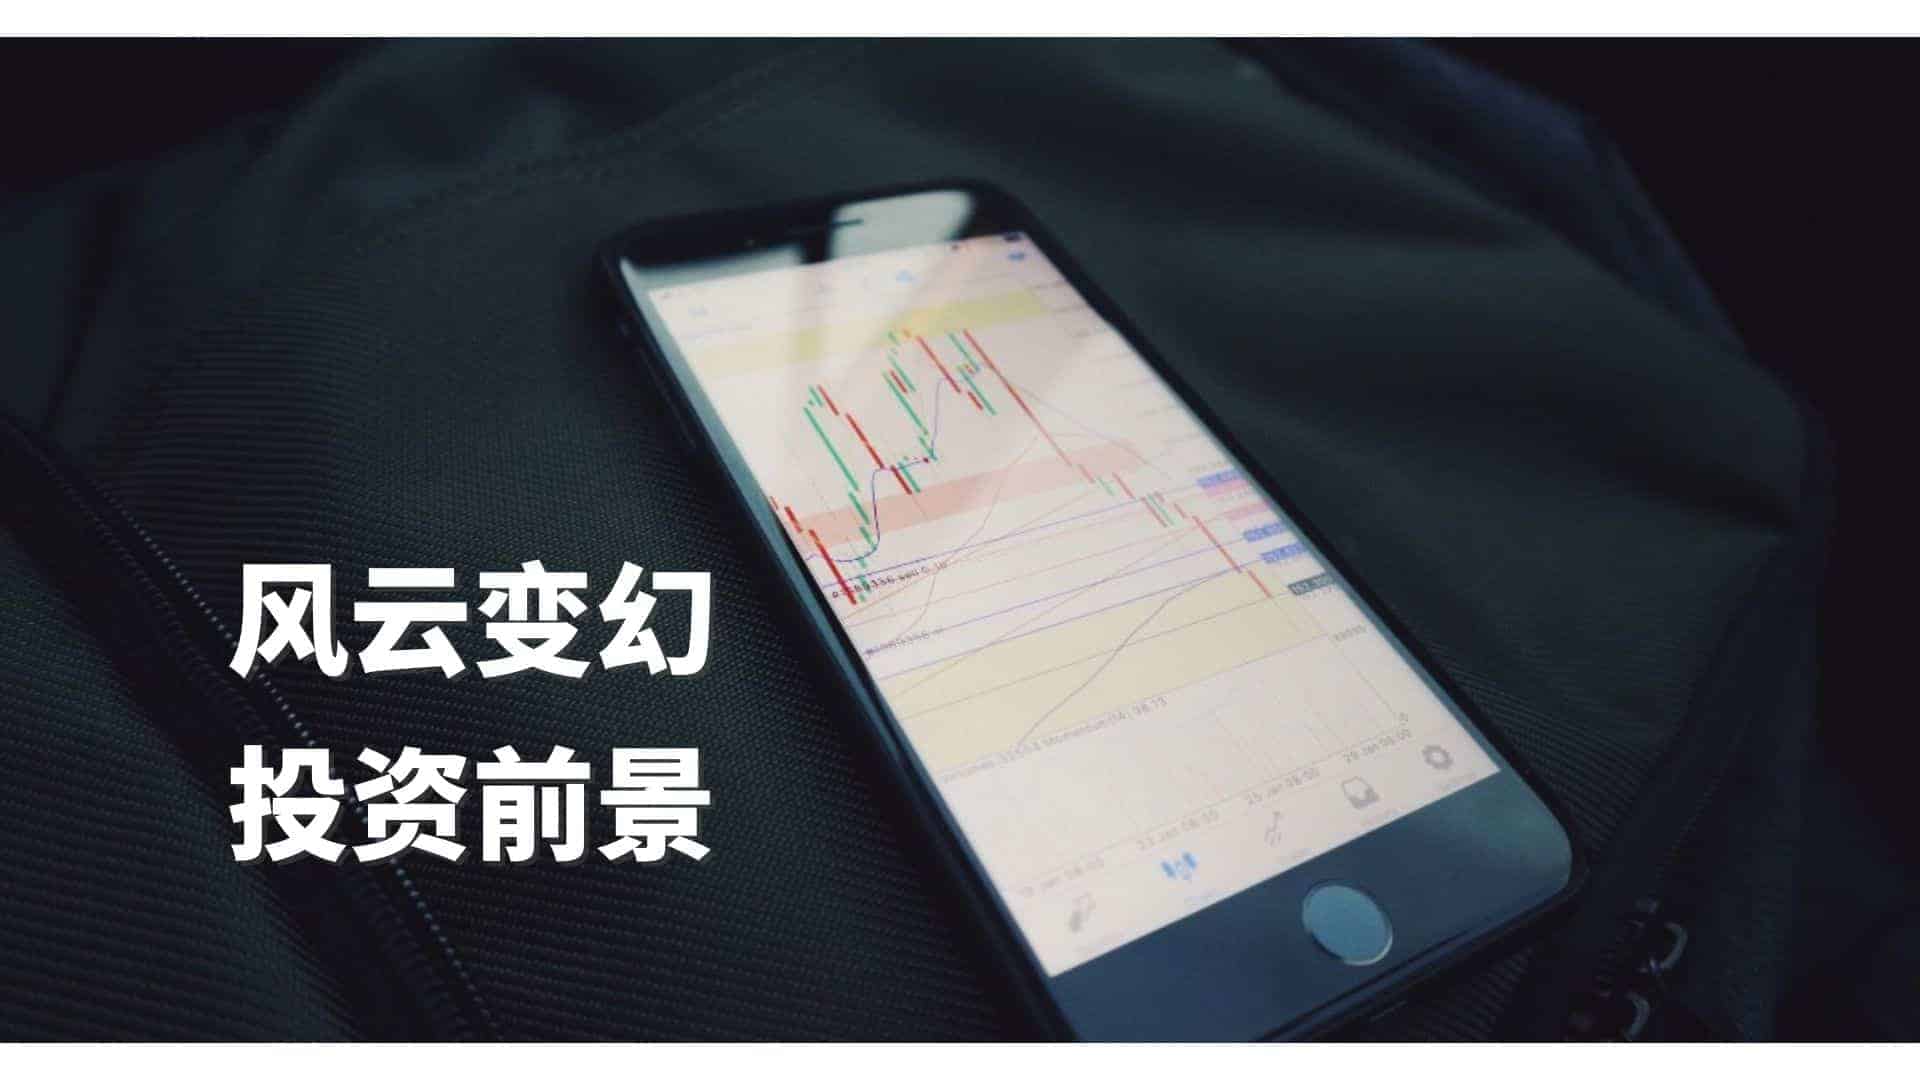 Read more about the article 投资风云变幻：分析当前投资前景